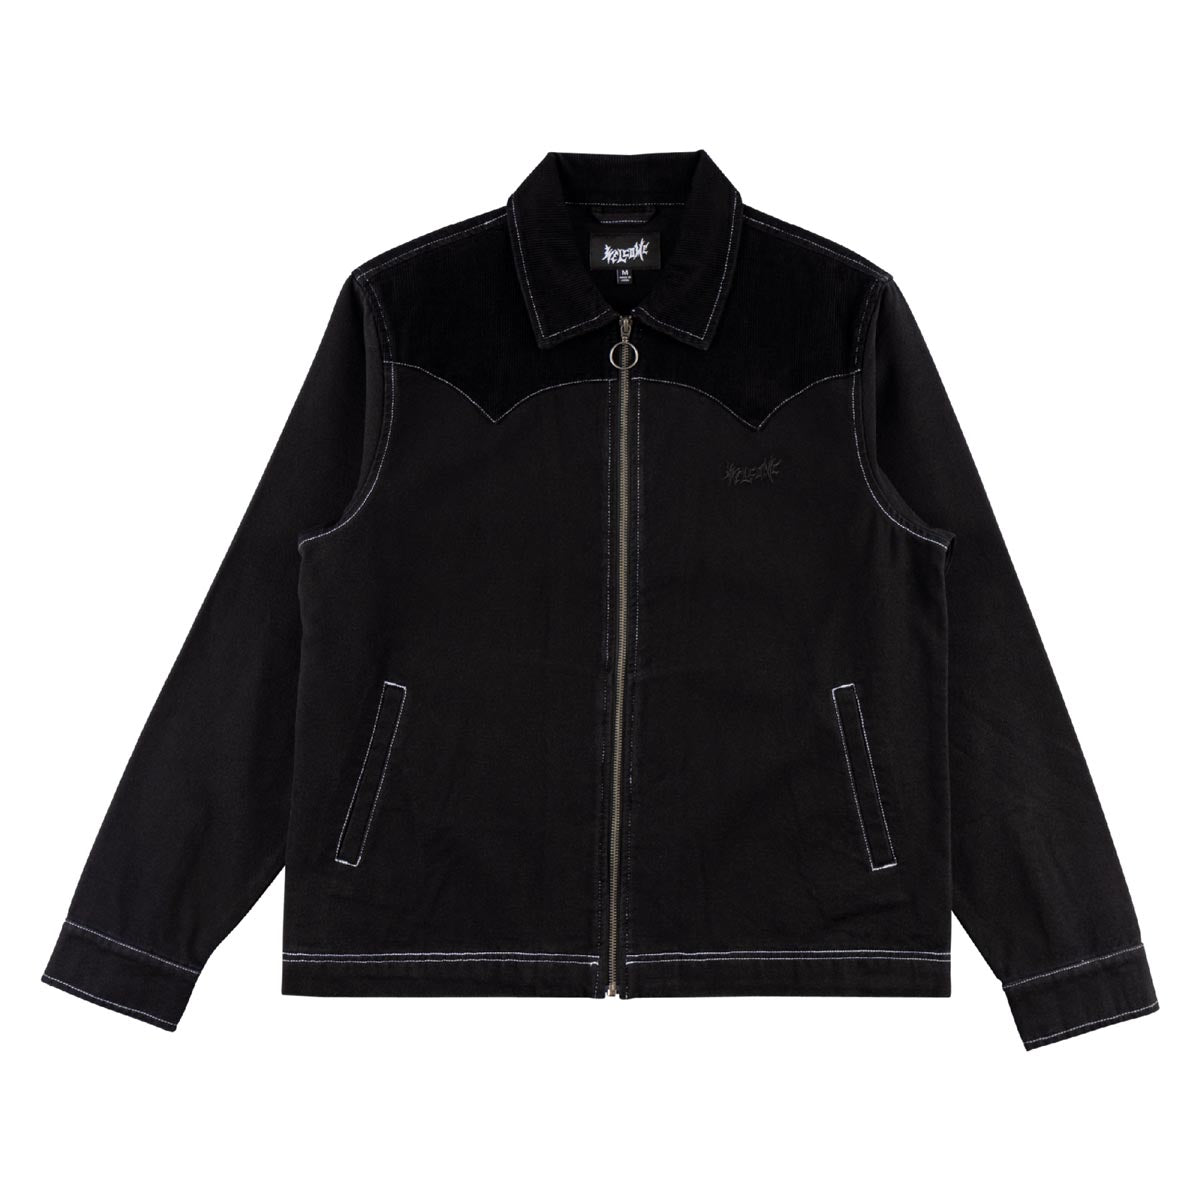 Welcome Outlaw Western Jacket - Black image 2